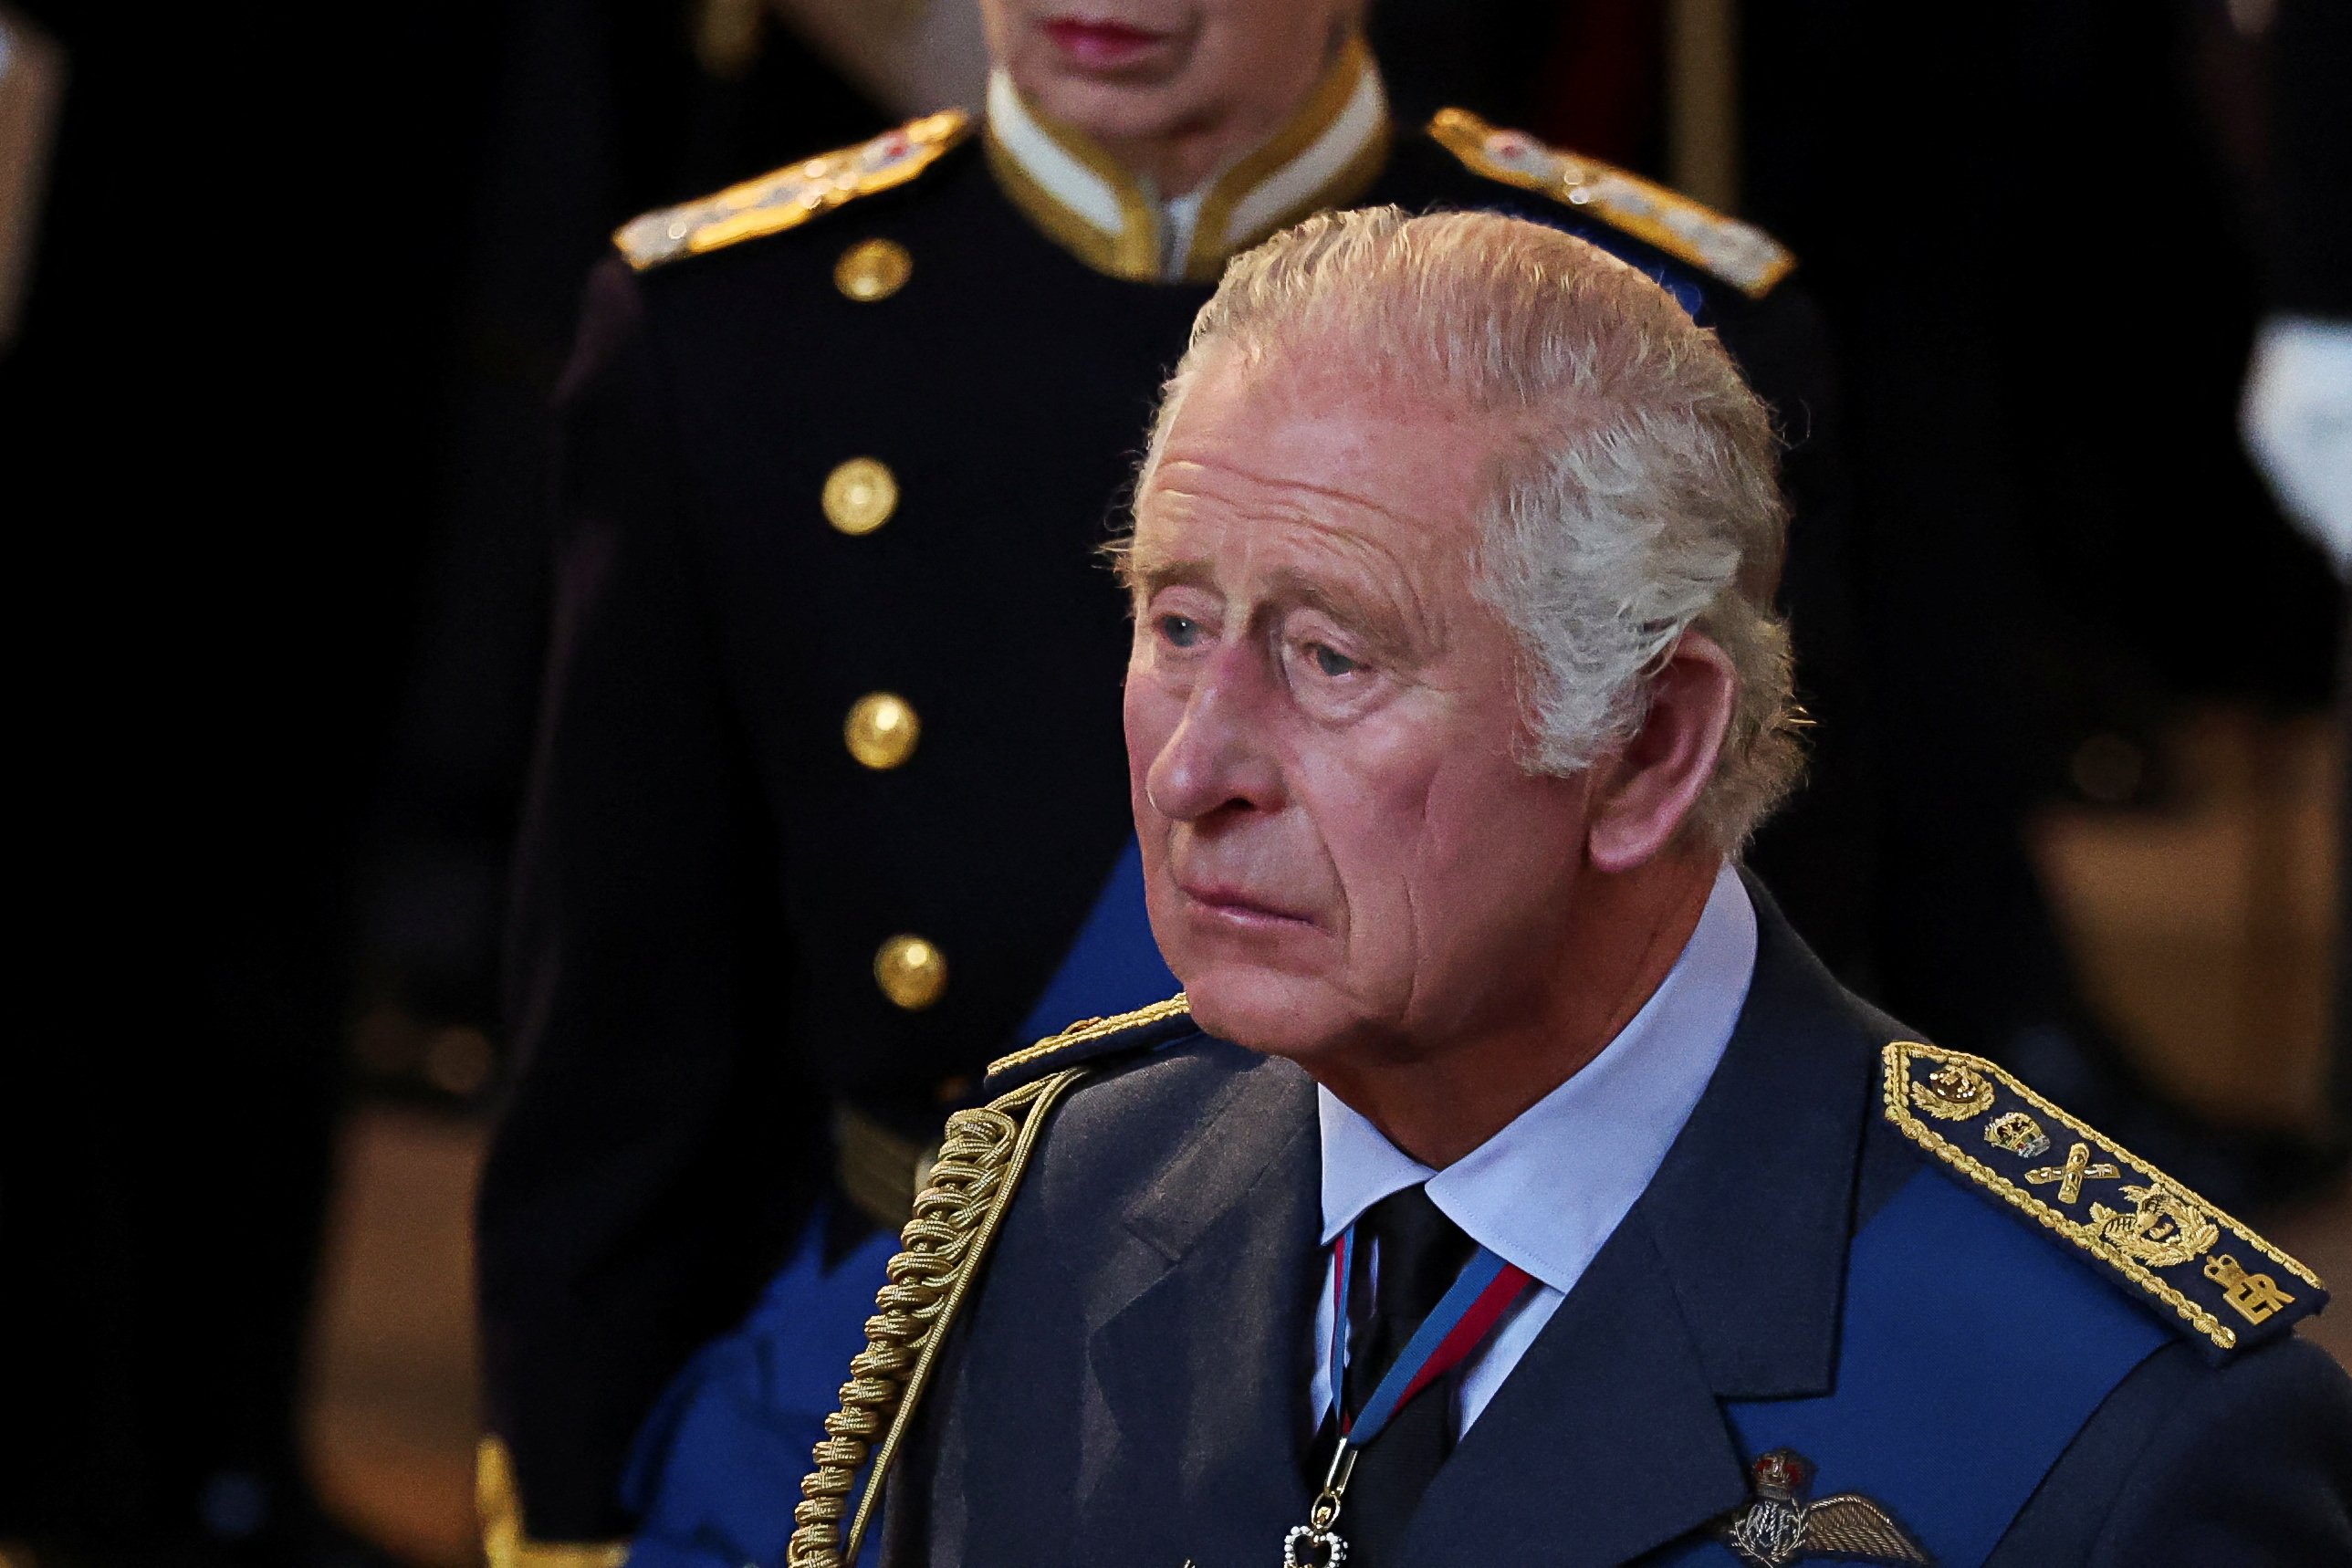 King Charles III during the procession honoring the coffin of Queen Elizabeth II as it arrives at Westminster Hall from Buckingham Palace on September 14, 2022 in London, United Kingdom | Source: Getty Images